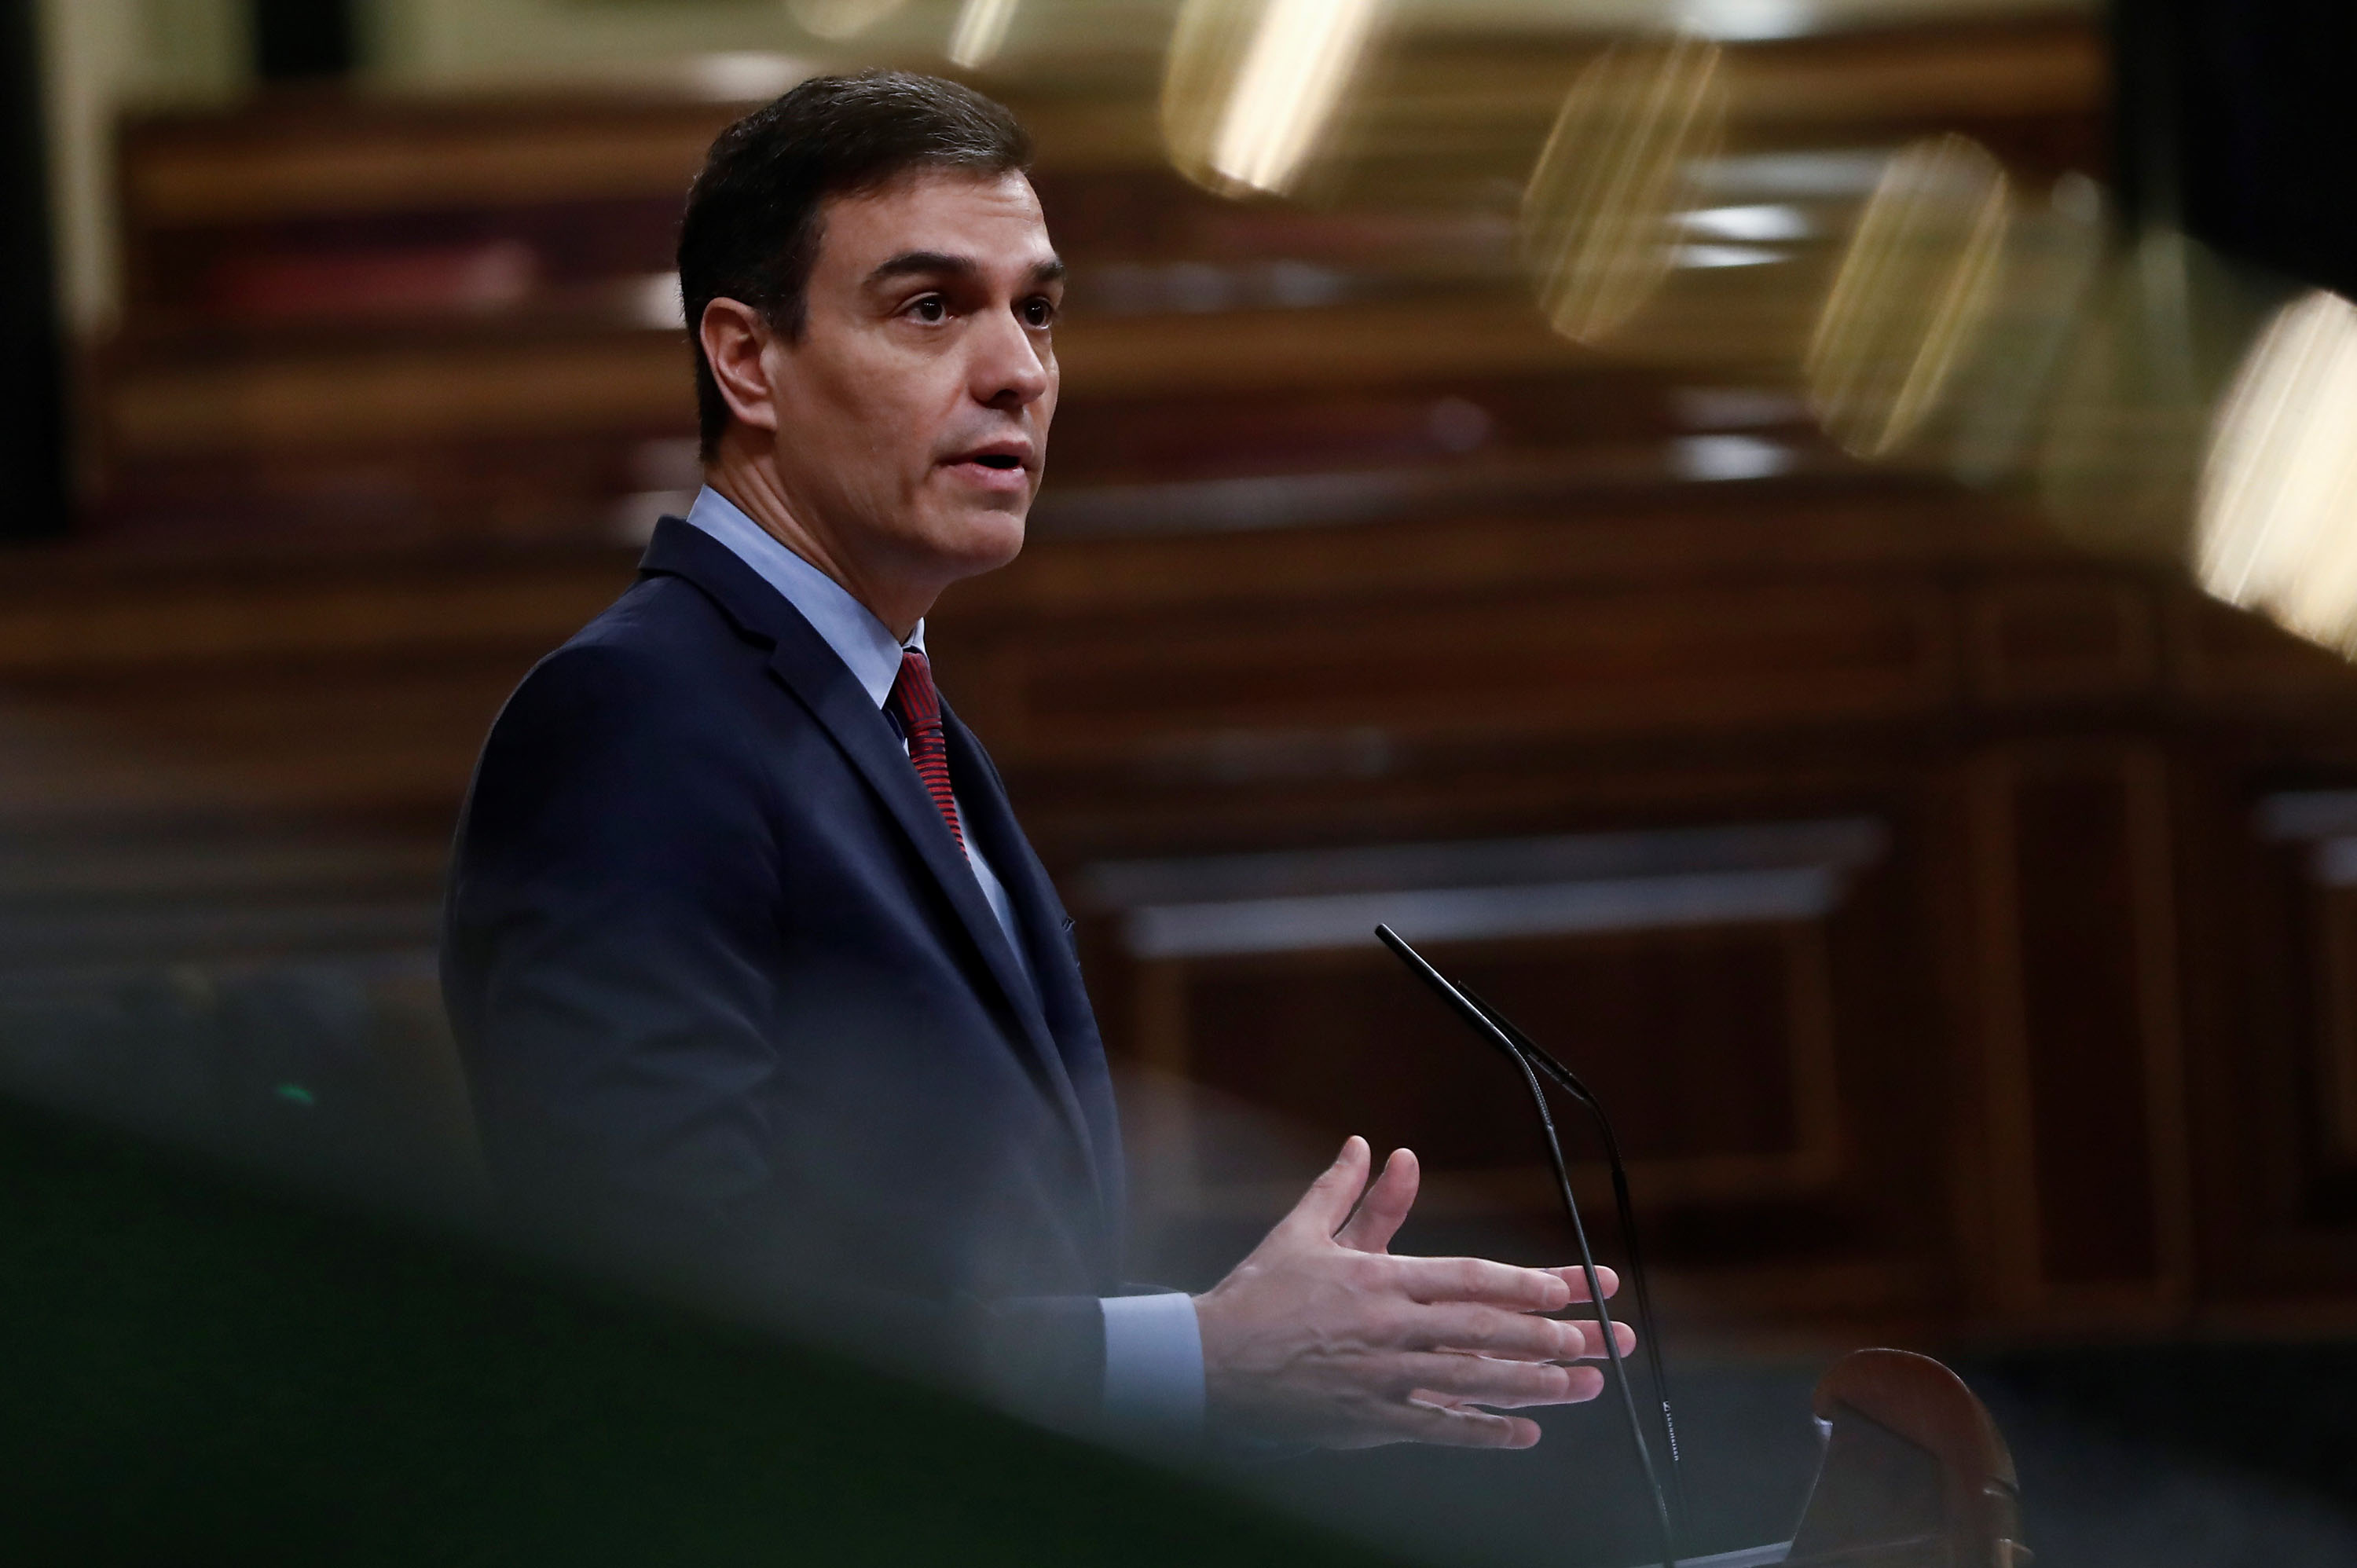 Spanish Prime Minister Pedro Sanchez delivers a speech at the Spanish Parliament in Madrid on April 9.